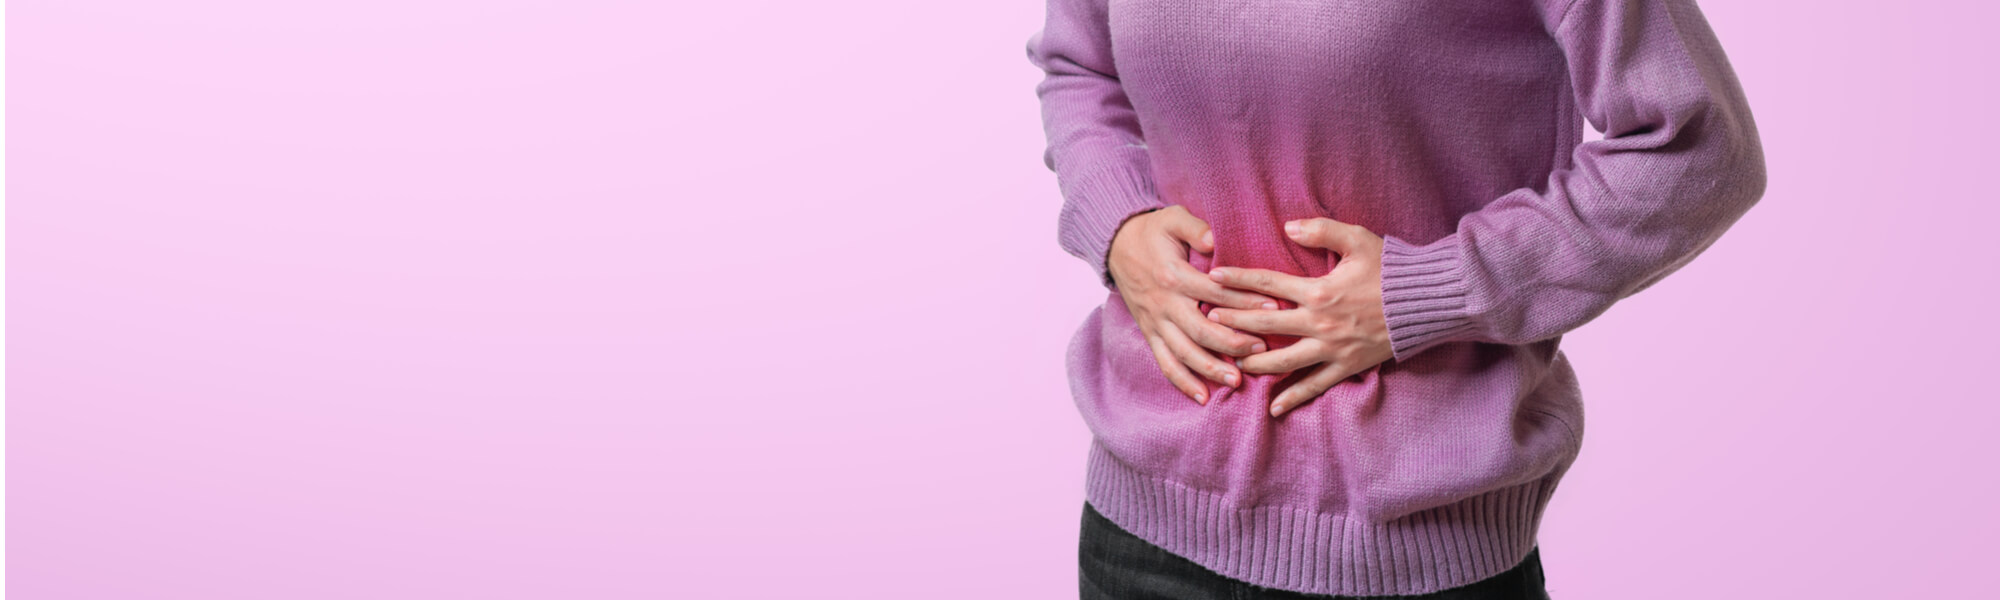 Can Constipation Cause Fever? Here's What You Should Know